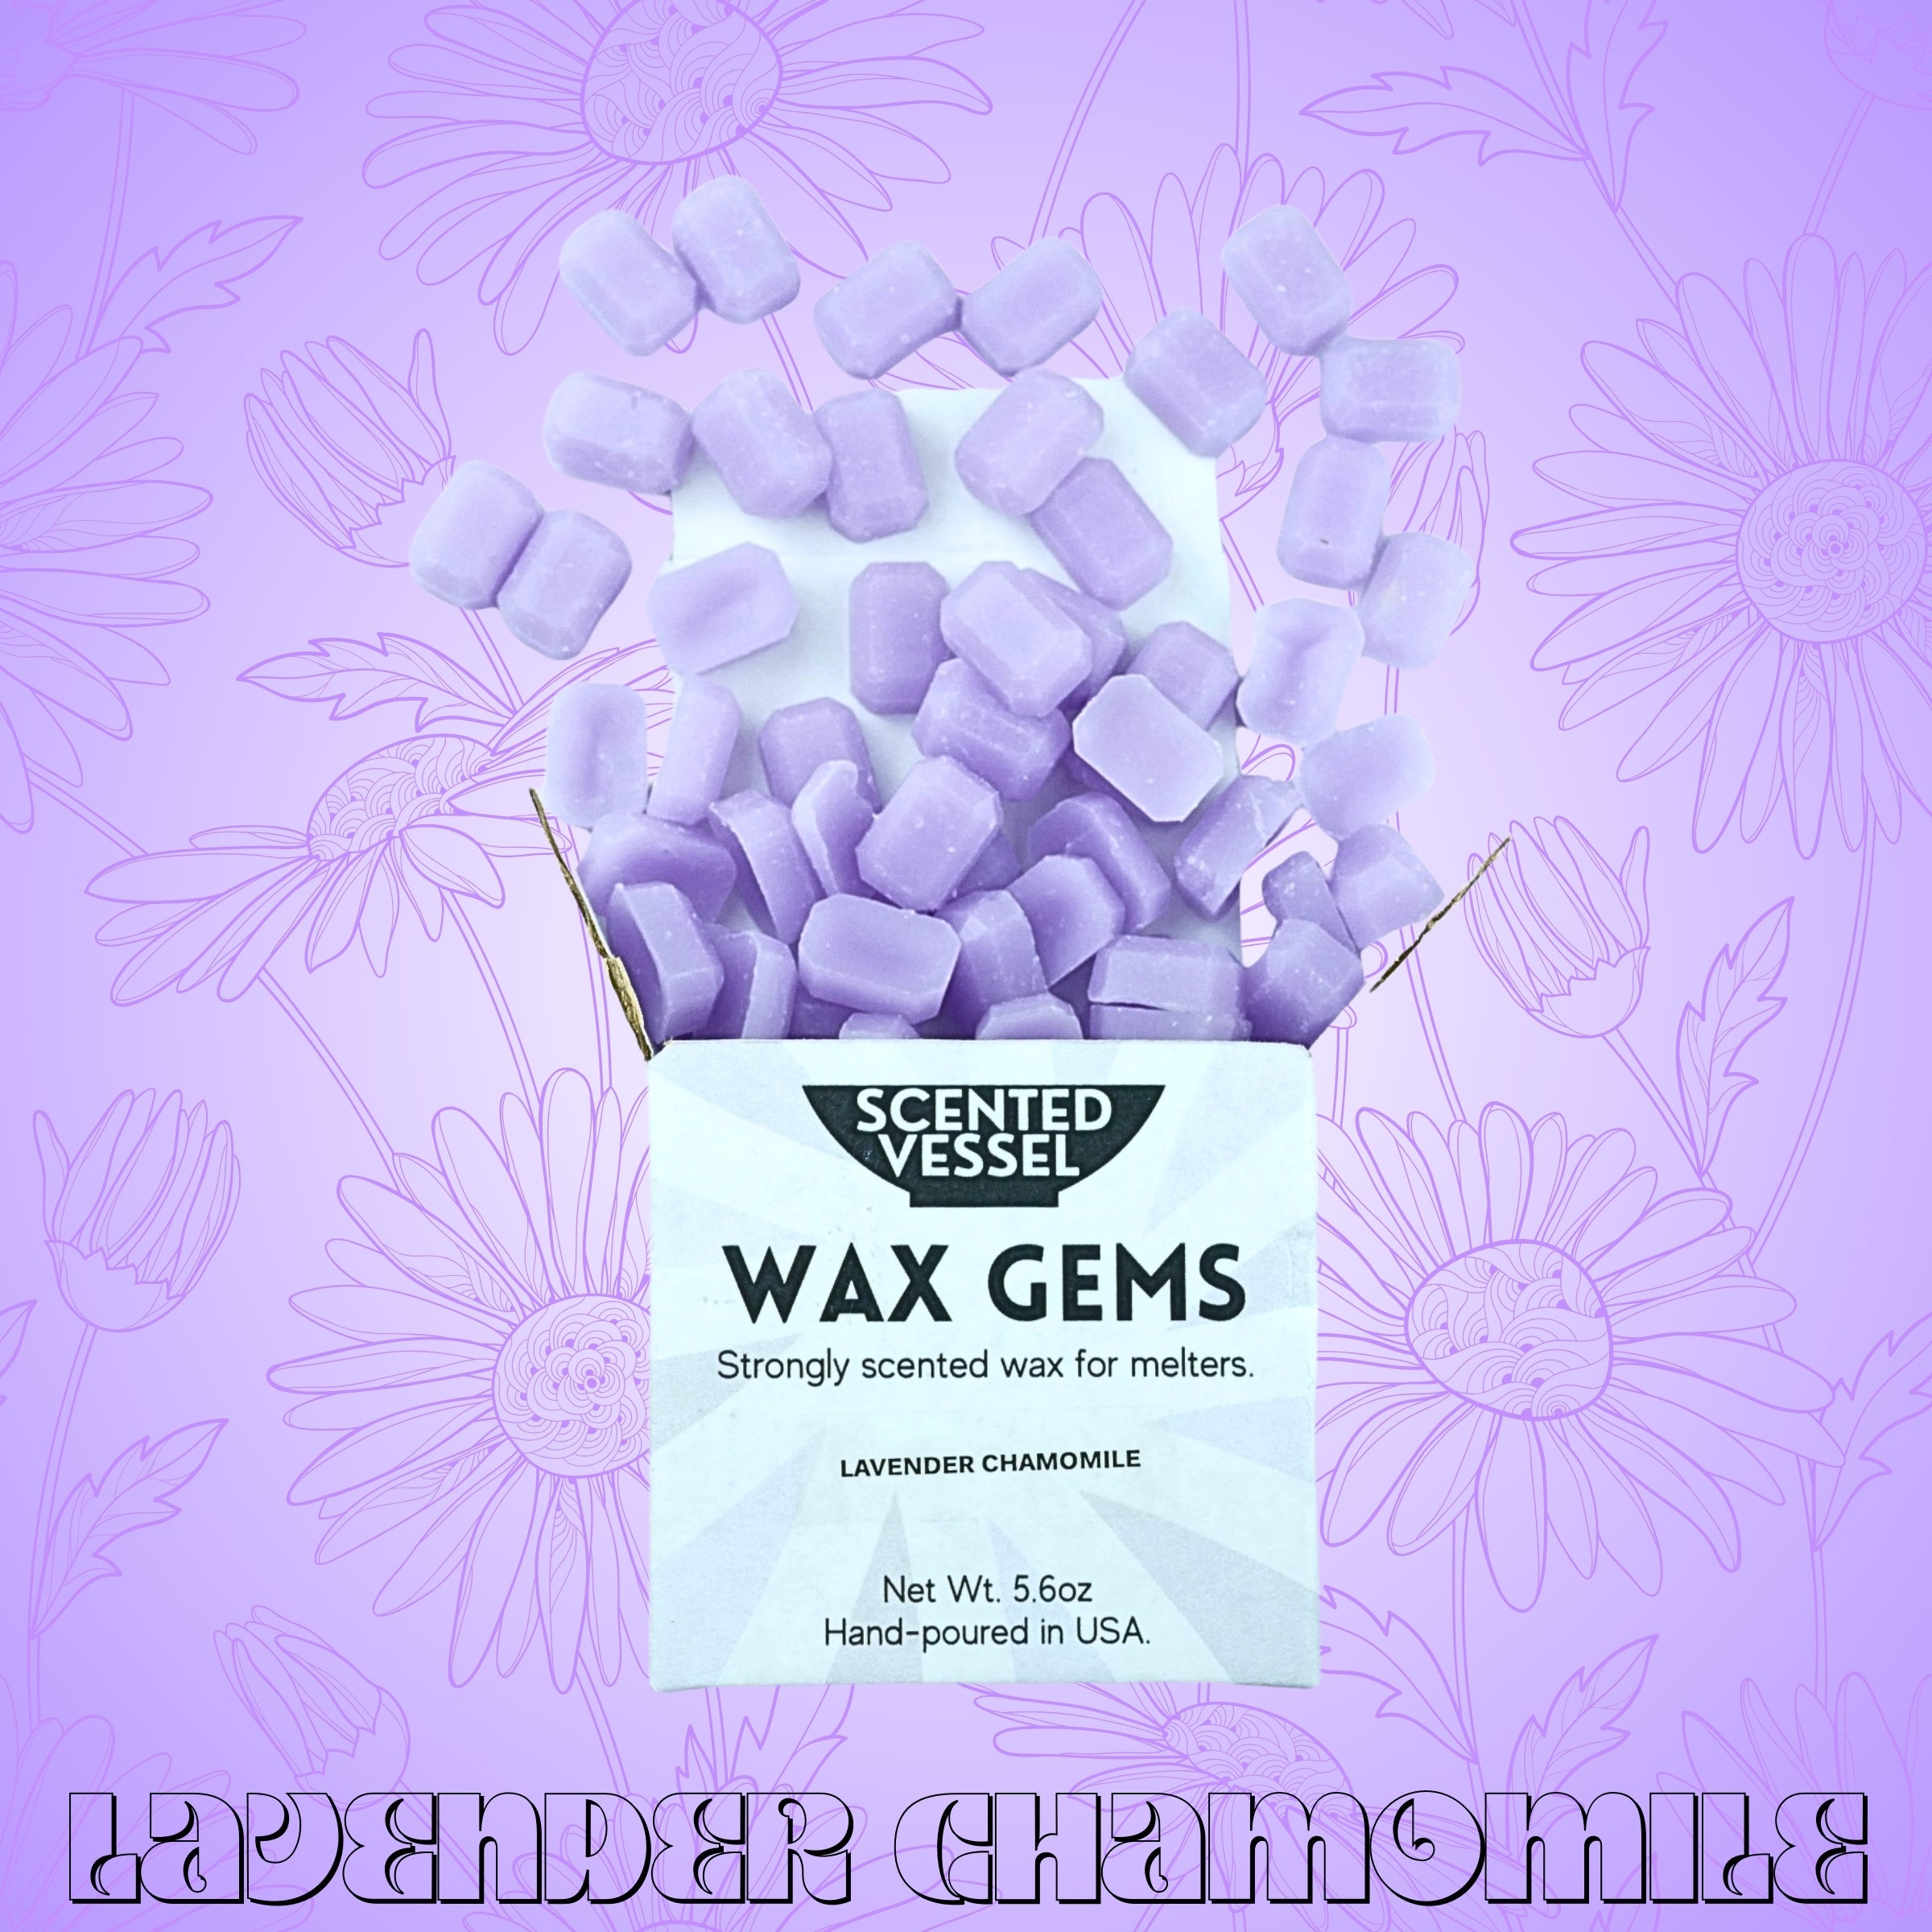 Lavender Chamomile 5.6oz Wax Gems by Scented Vessel